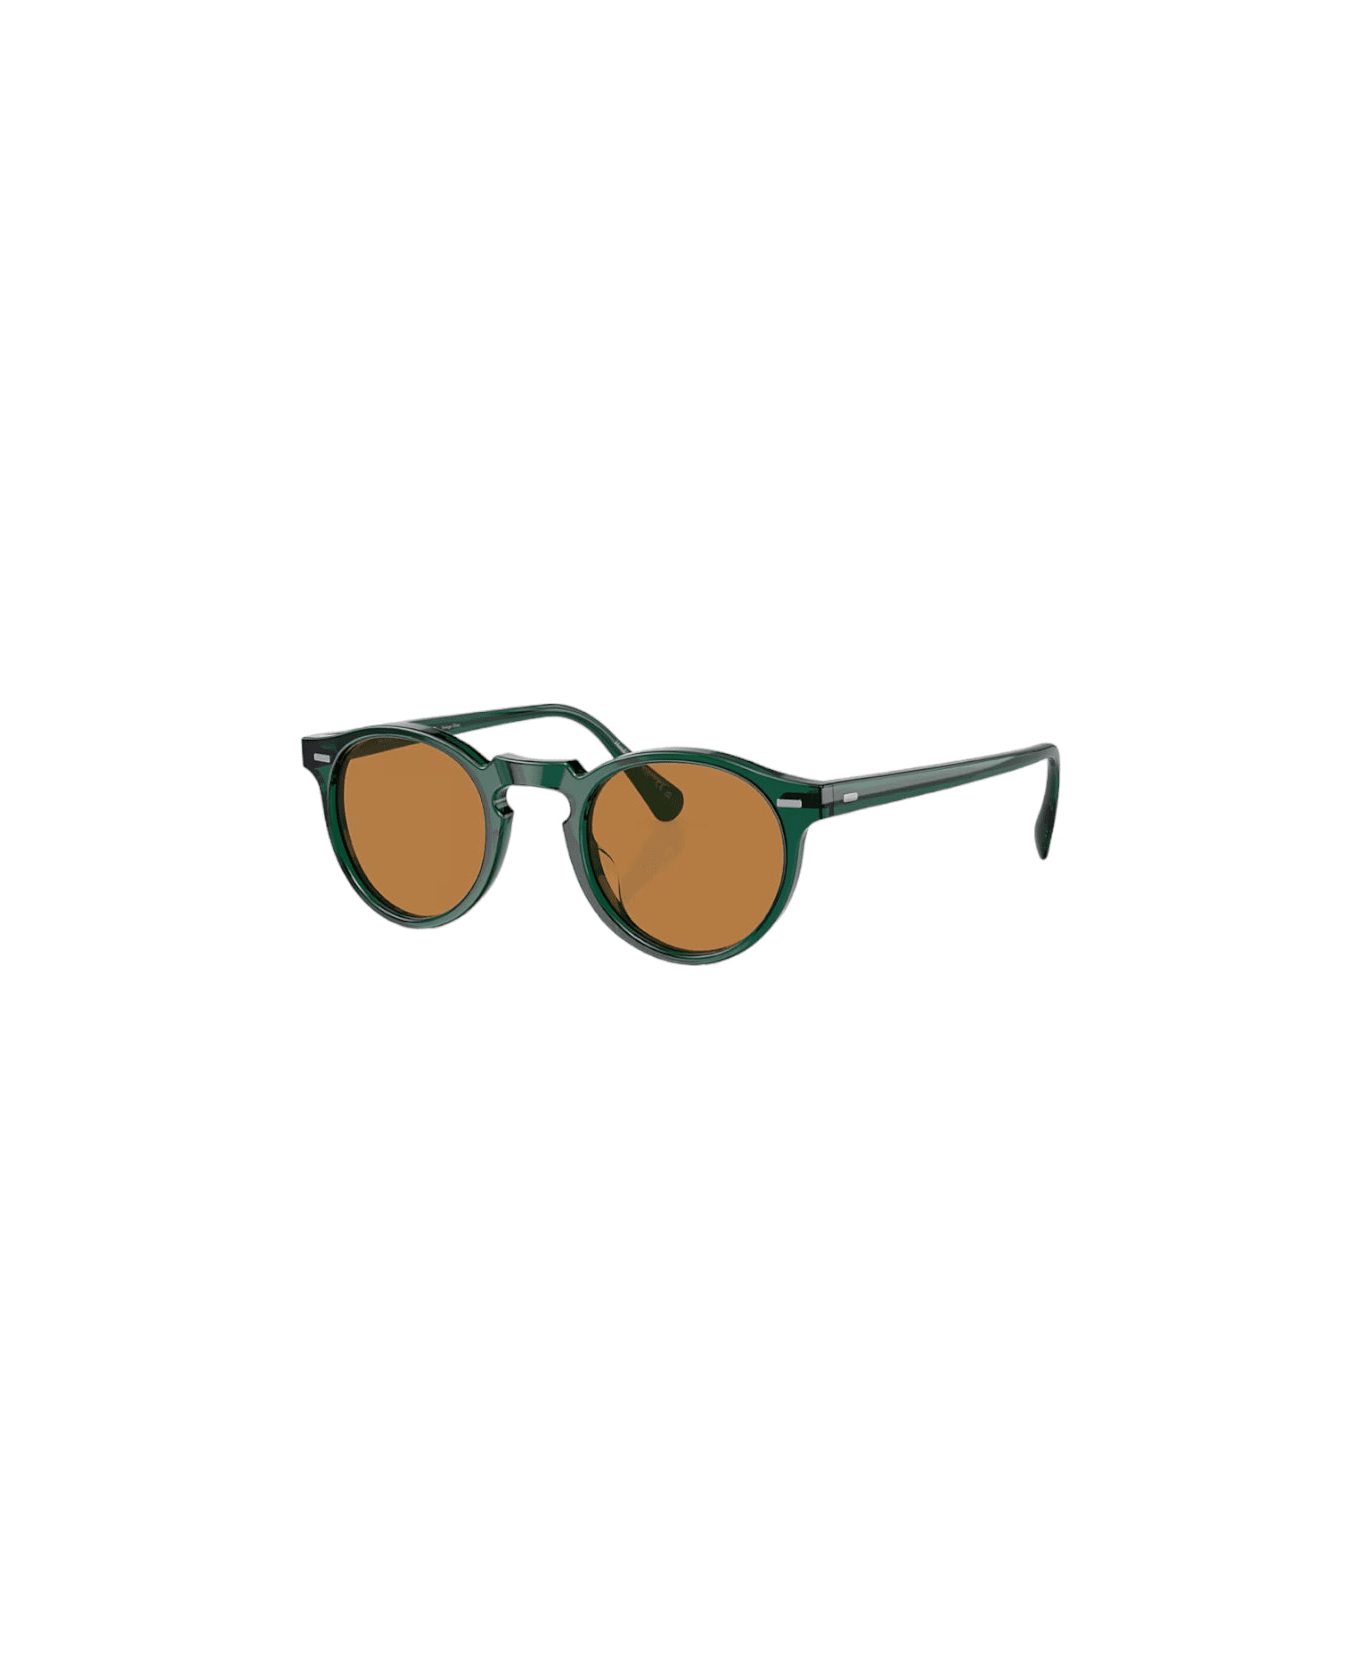 Oliver Peoples Gregory Peck Sun Sunglasses サングラス